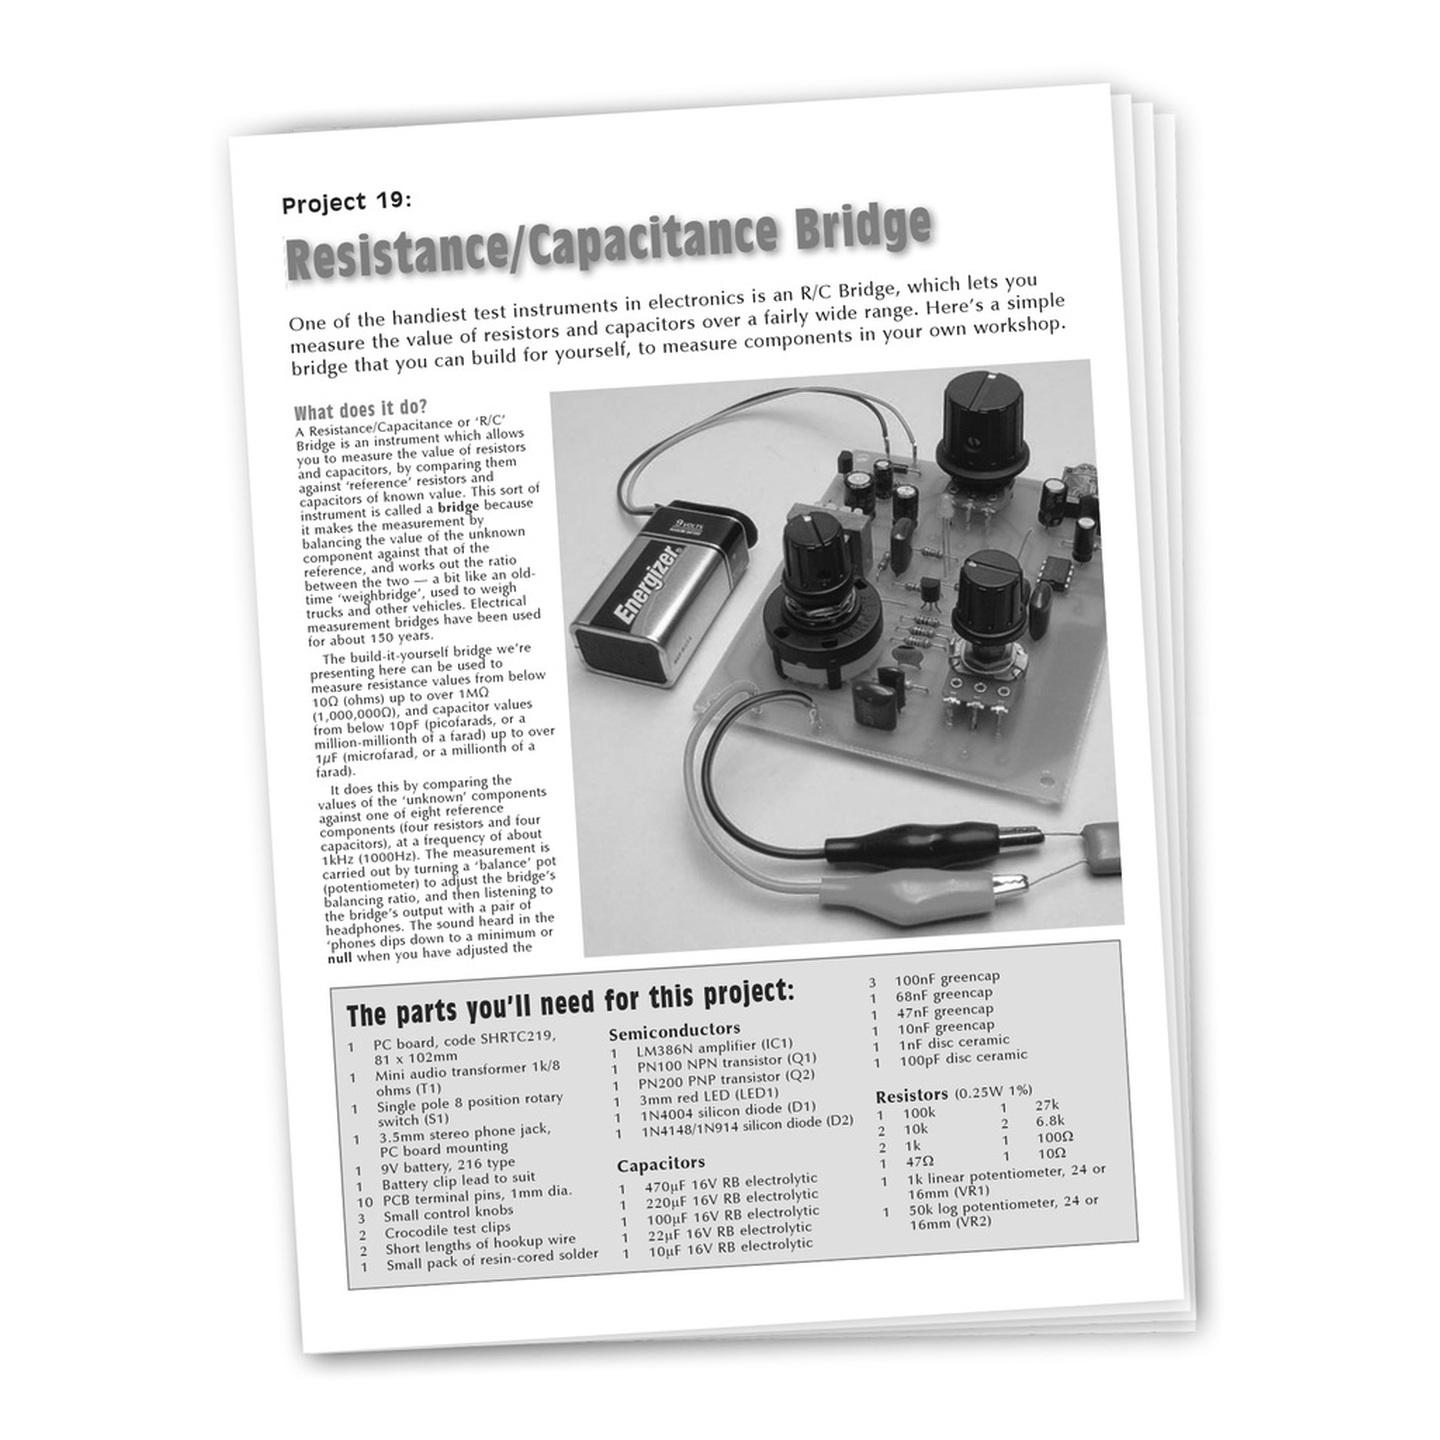 Instructions to suit SC2 Project - KJ8240 Tester for Capacitors and Resistors